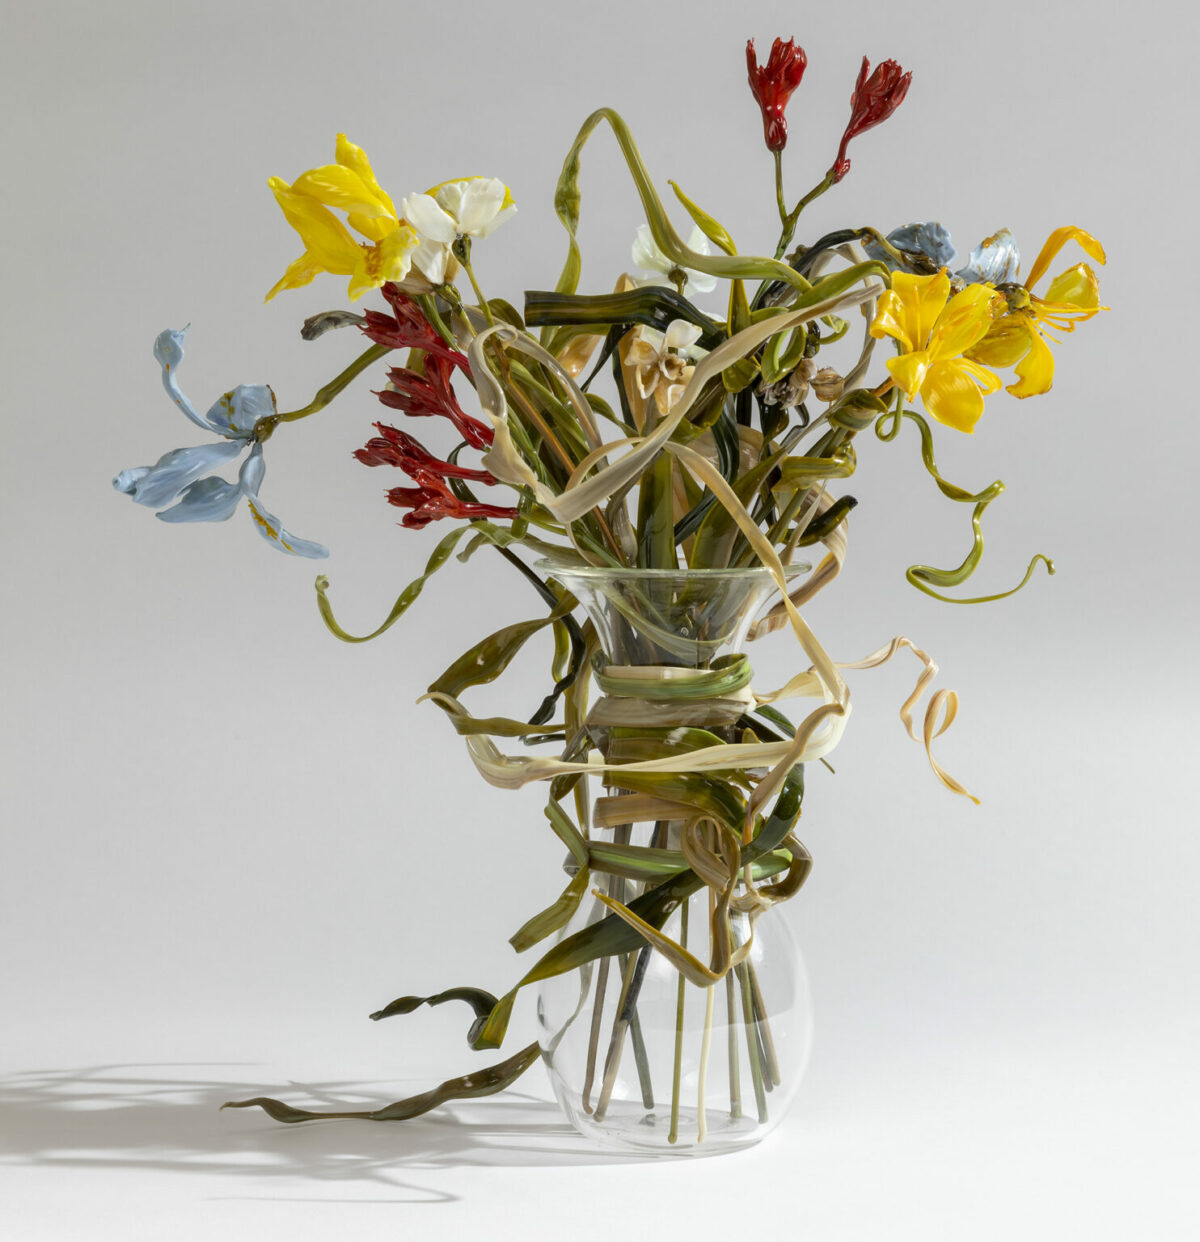 Glass still-life: fascinating sculptures by Lilla Tabasso